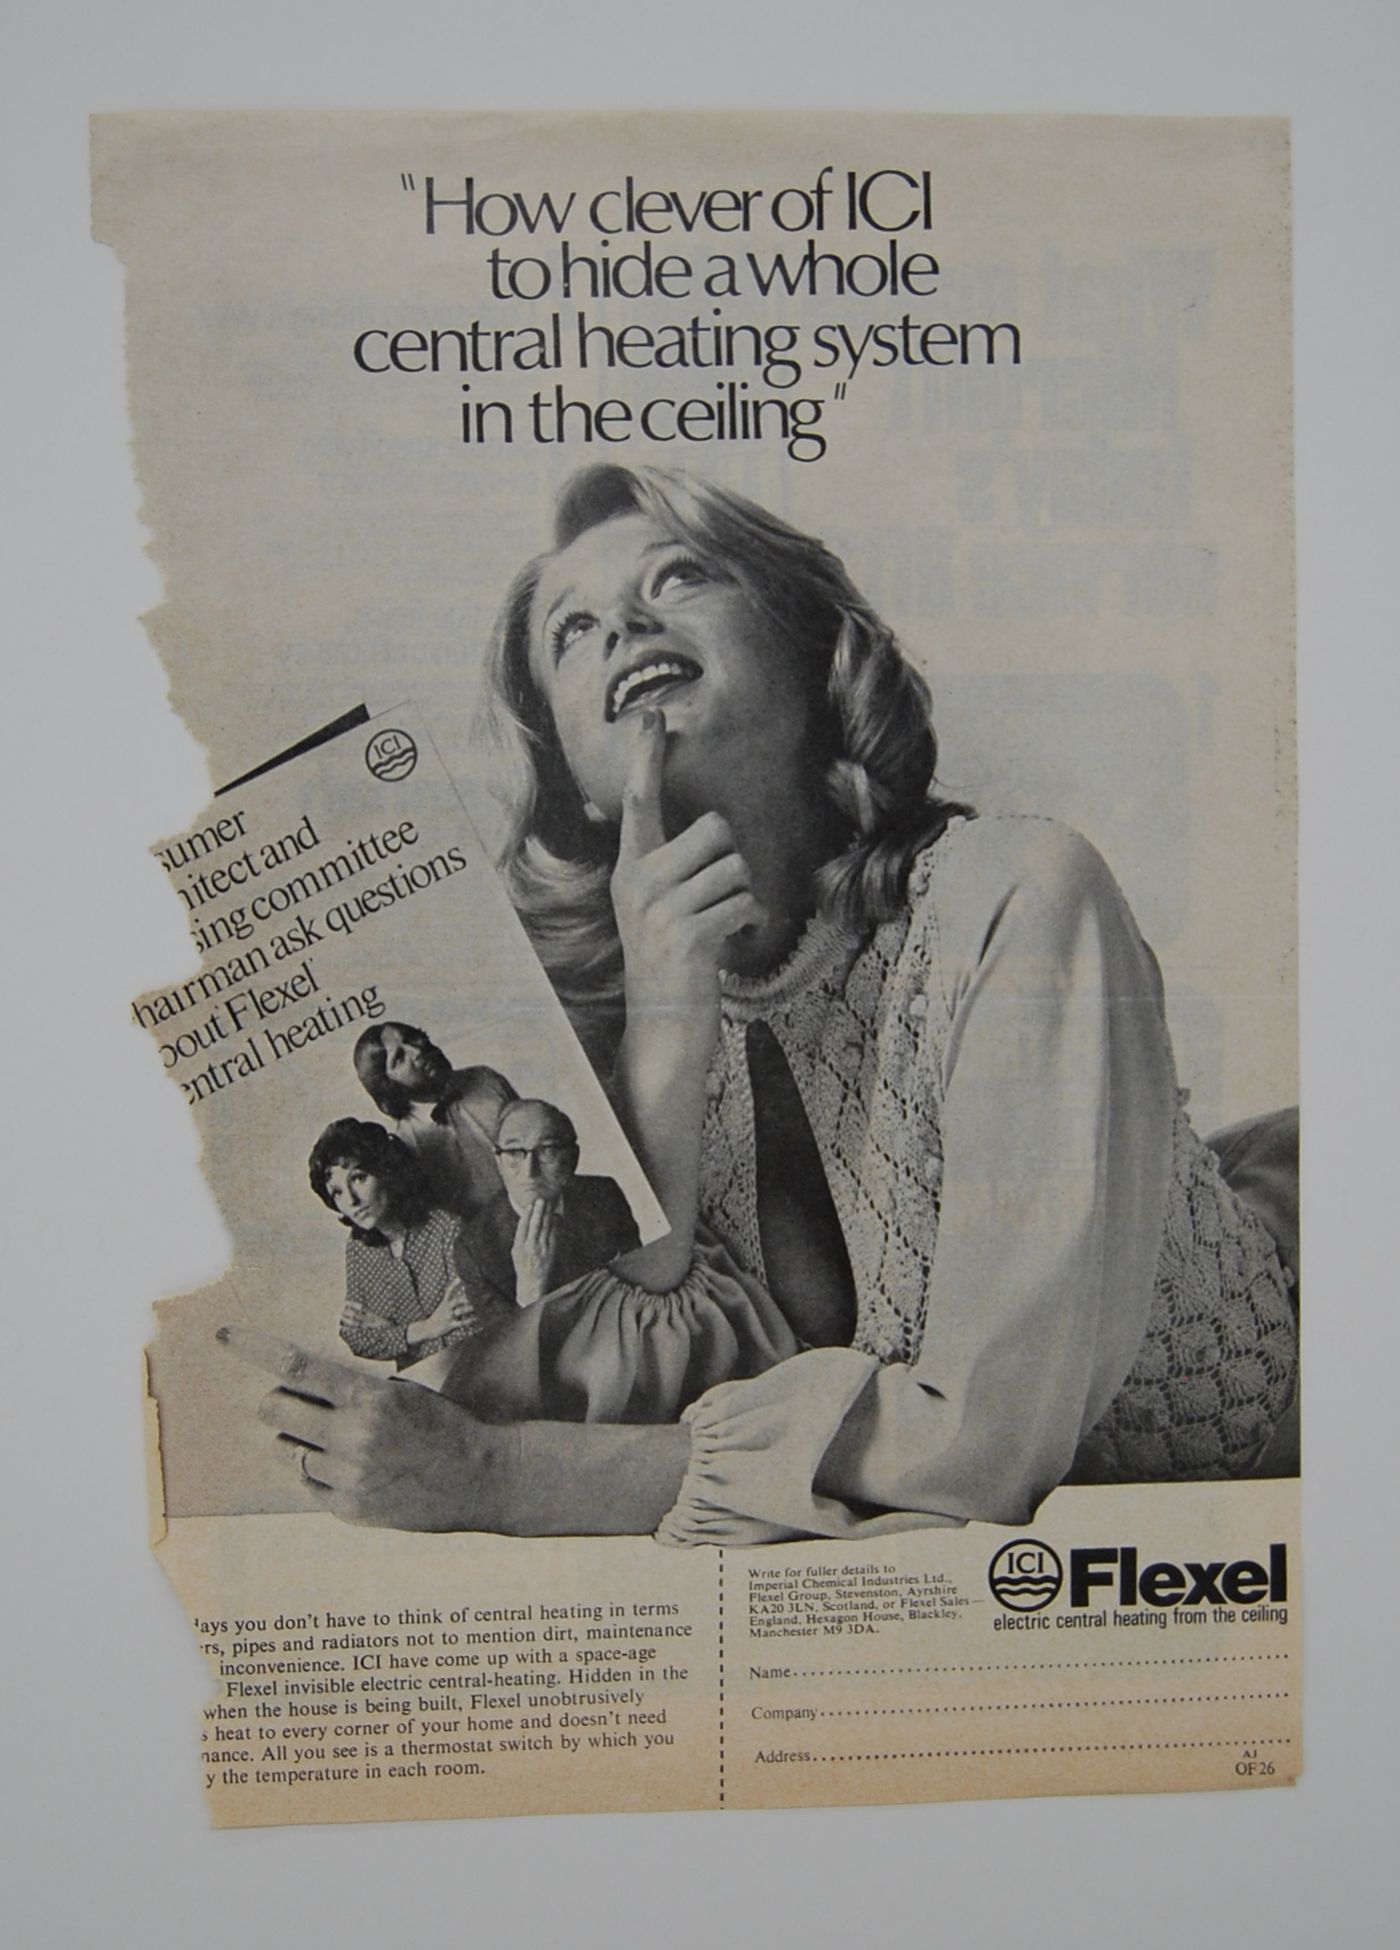 Advertisement for the Flexel electric central heating from the ceiling (published in The Architect's Journal, 27 November 1974)